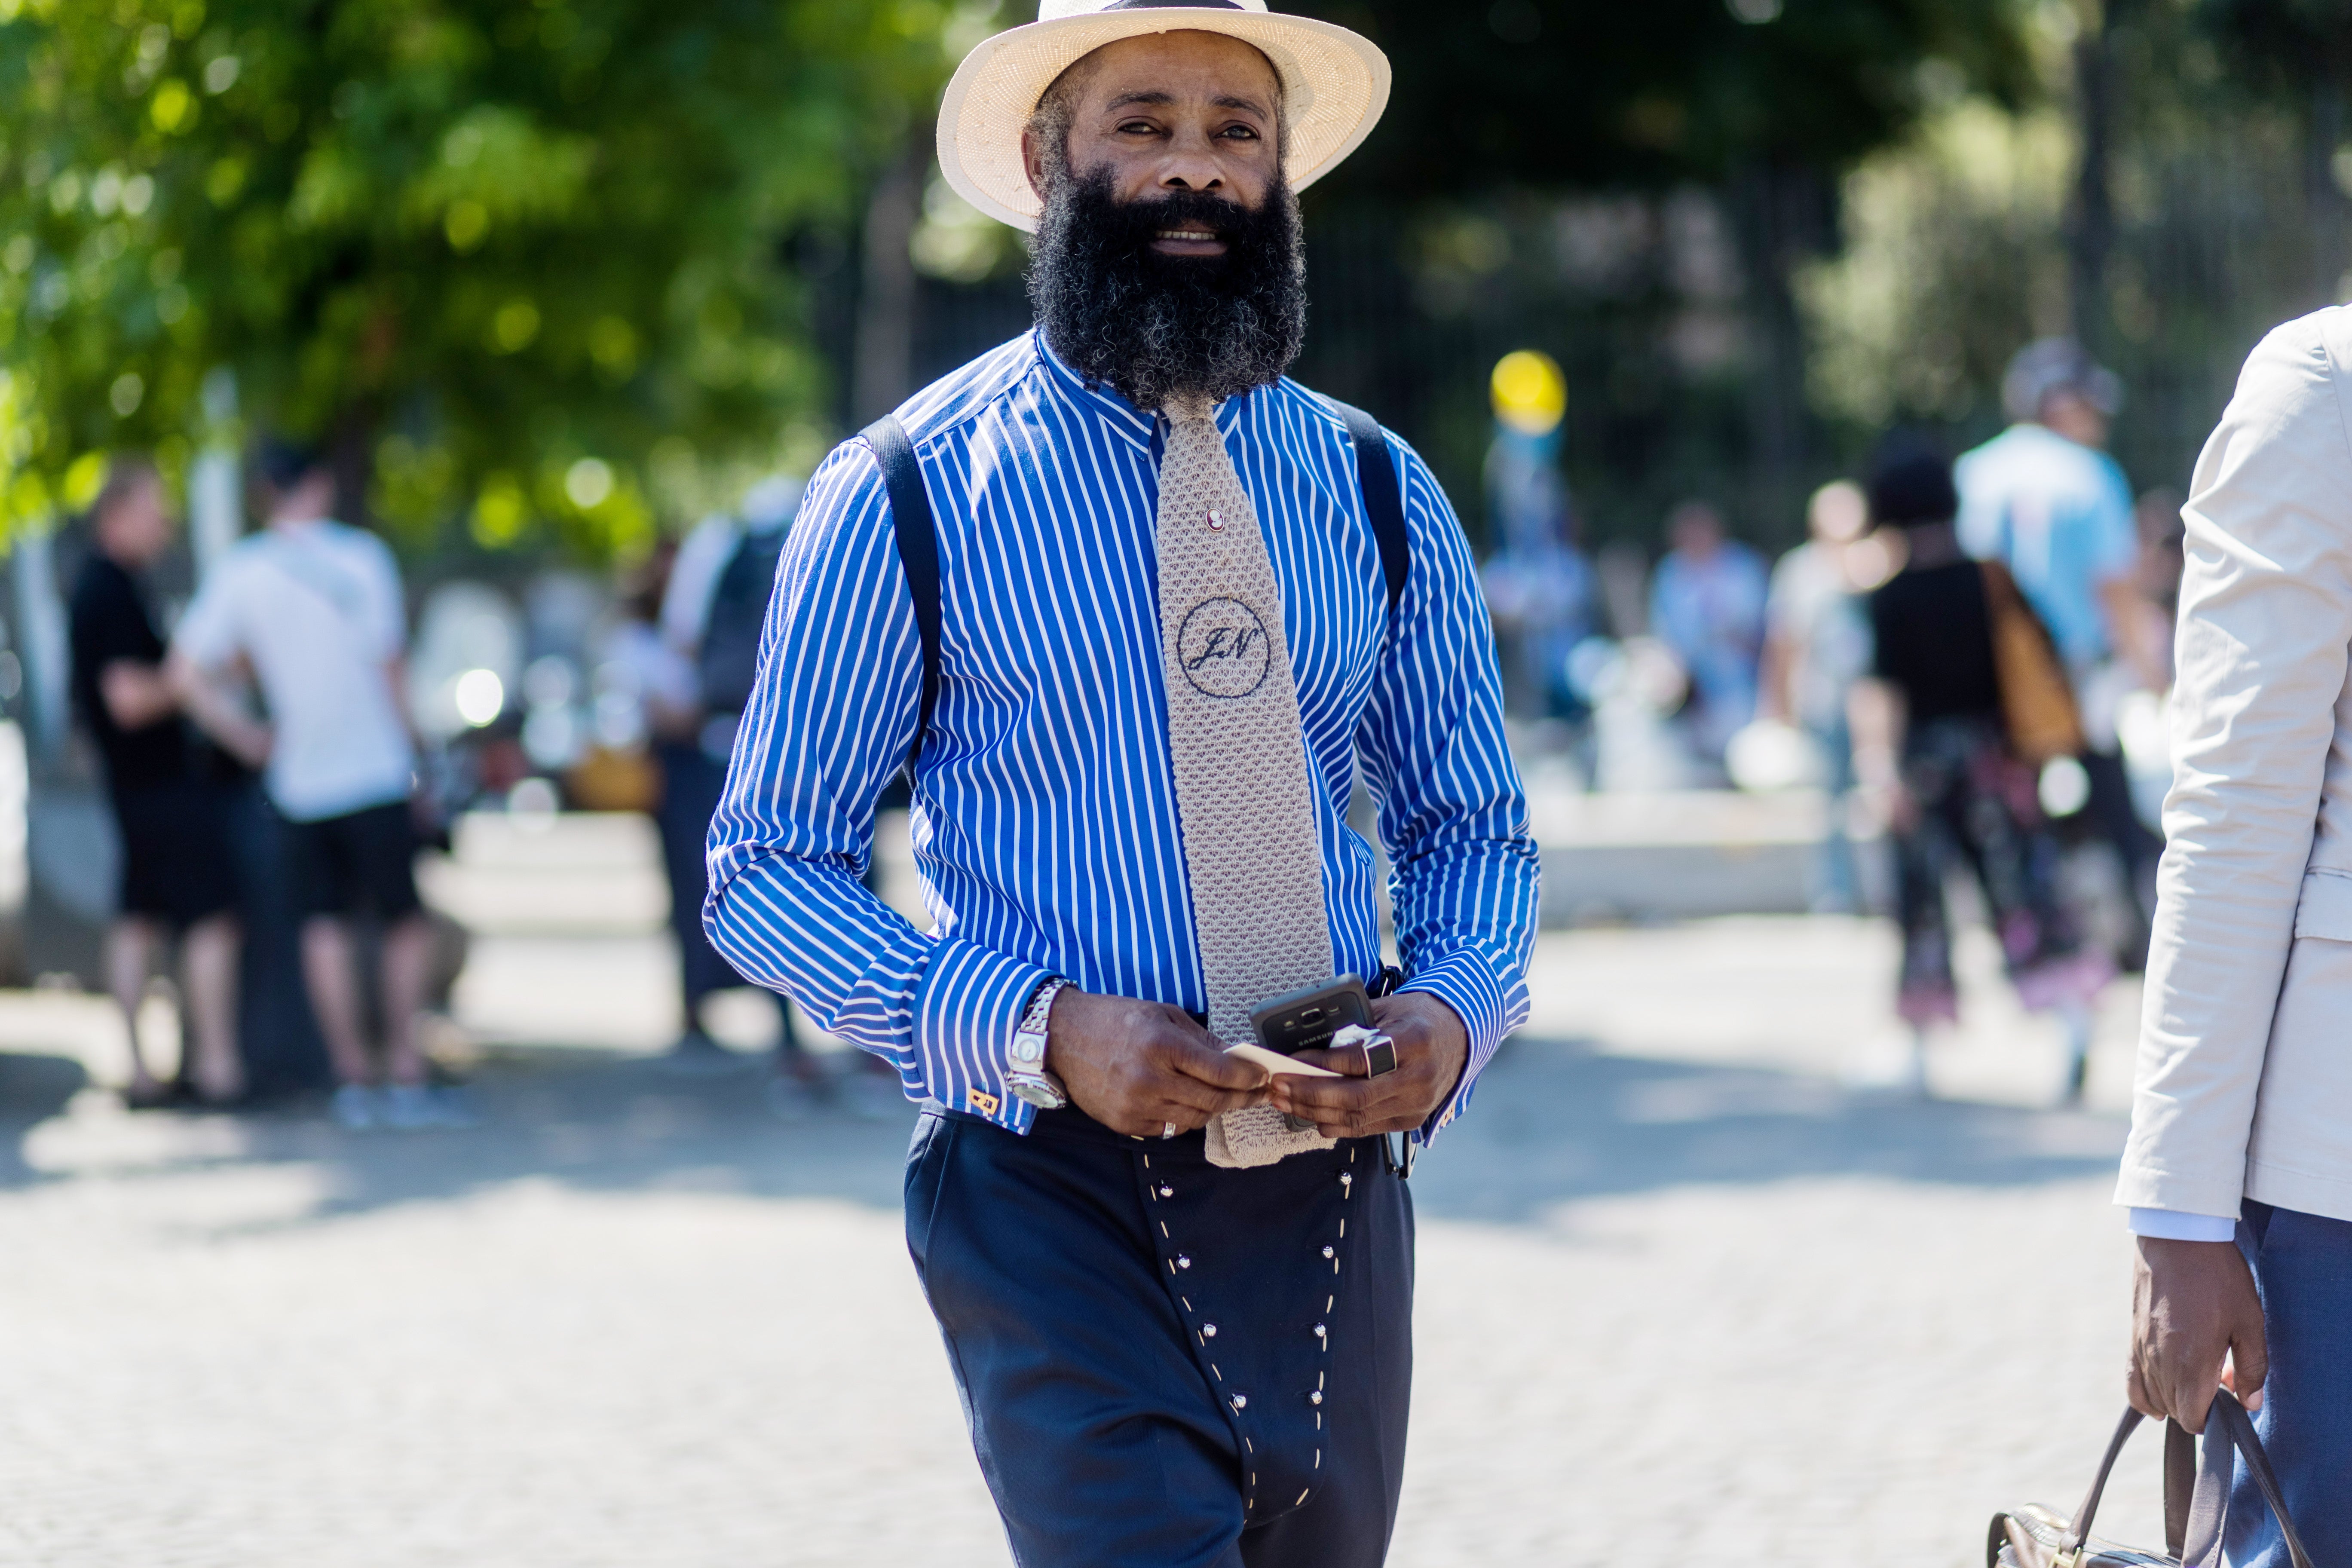 You Have to See The Next Level Street Style From This Italian Menswear Extravaganza
